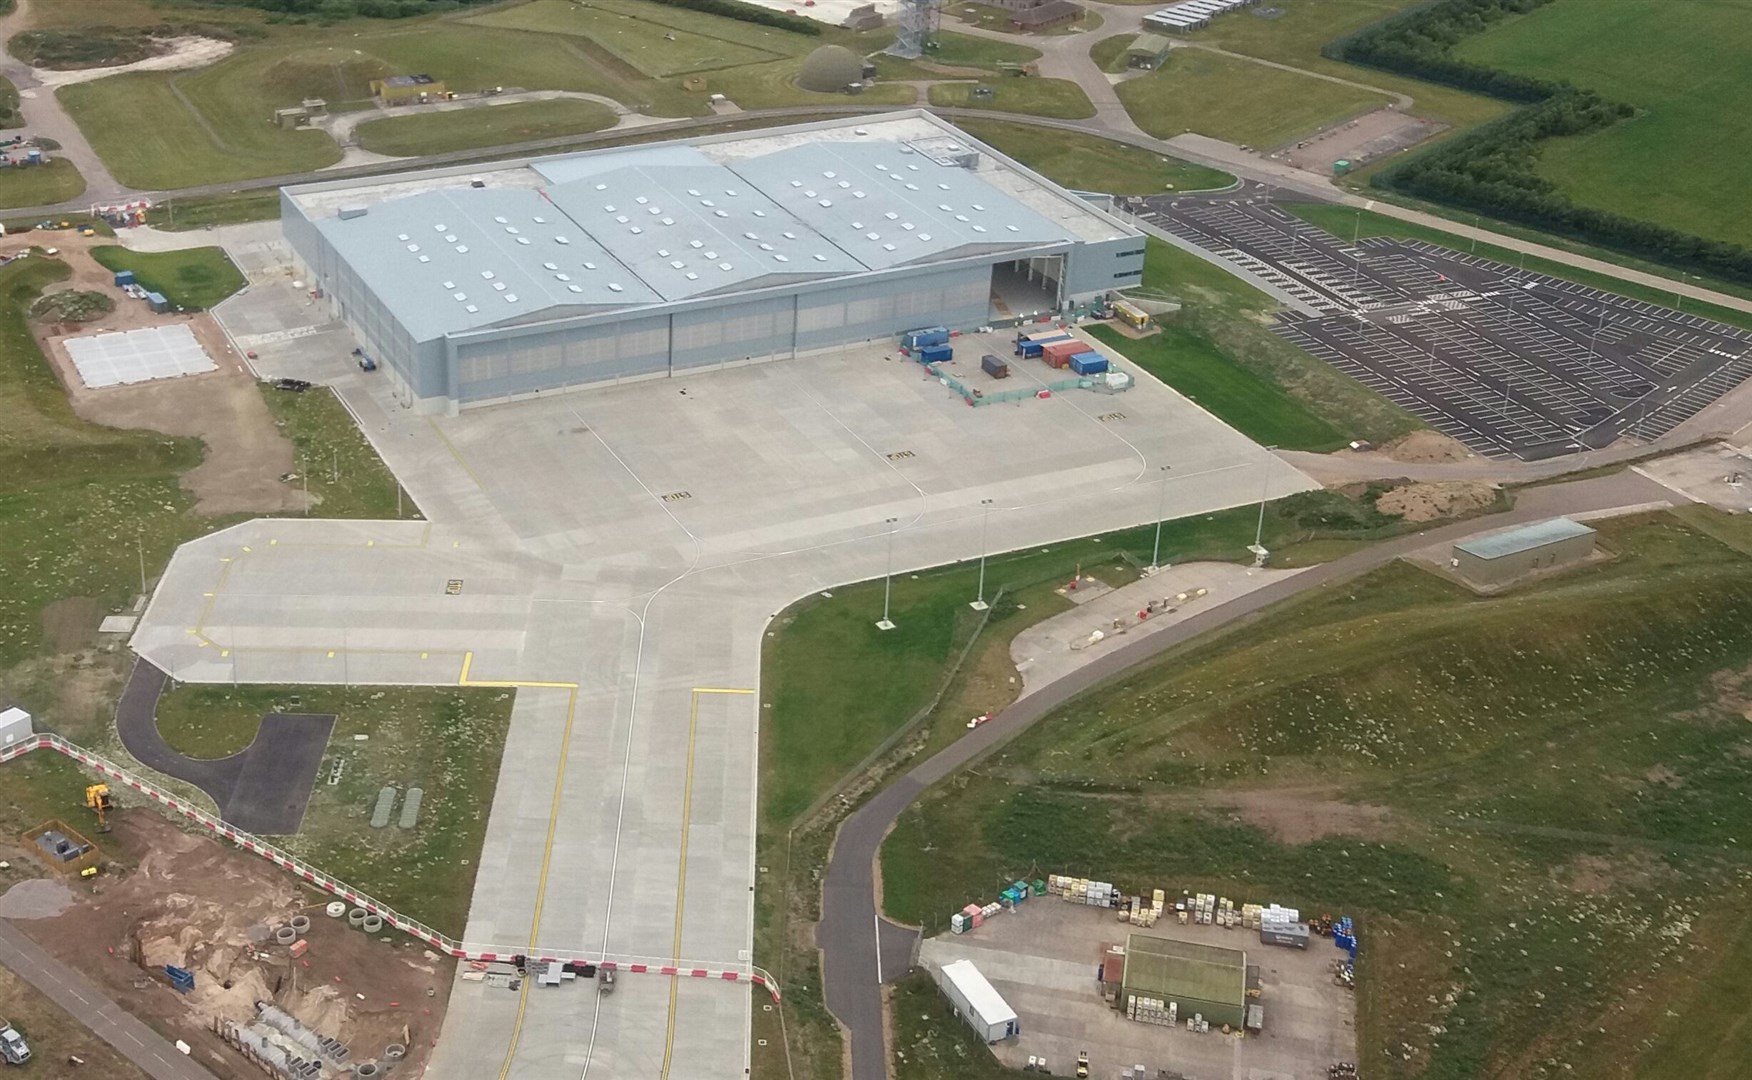 The 33,000 square metre facility will be home to nine Poseidon aircraft.